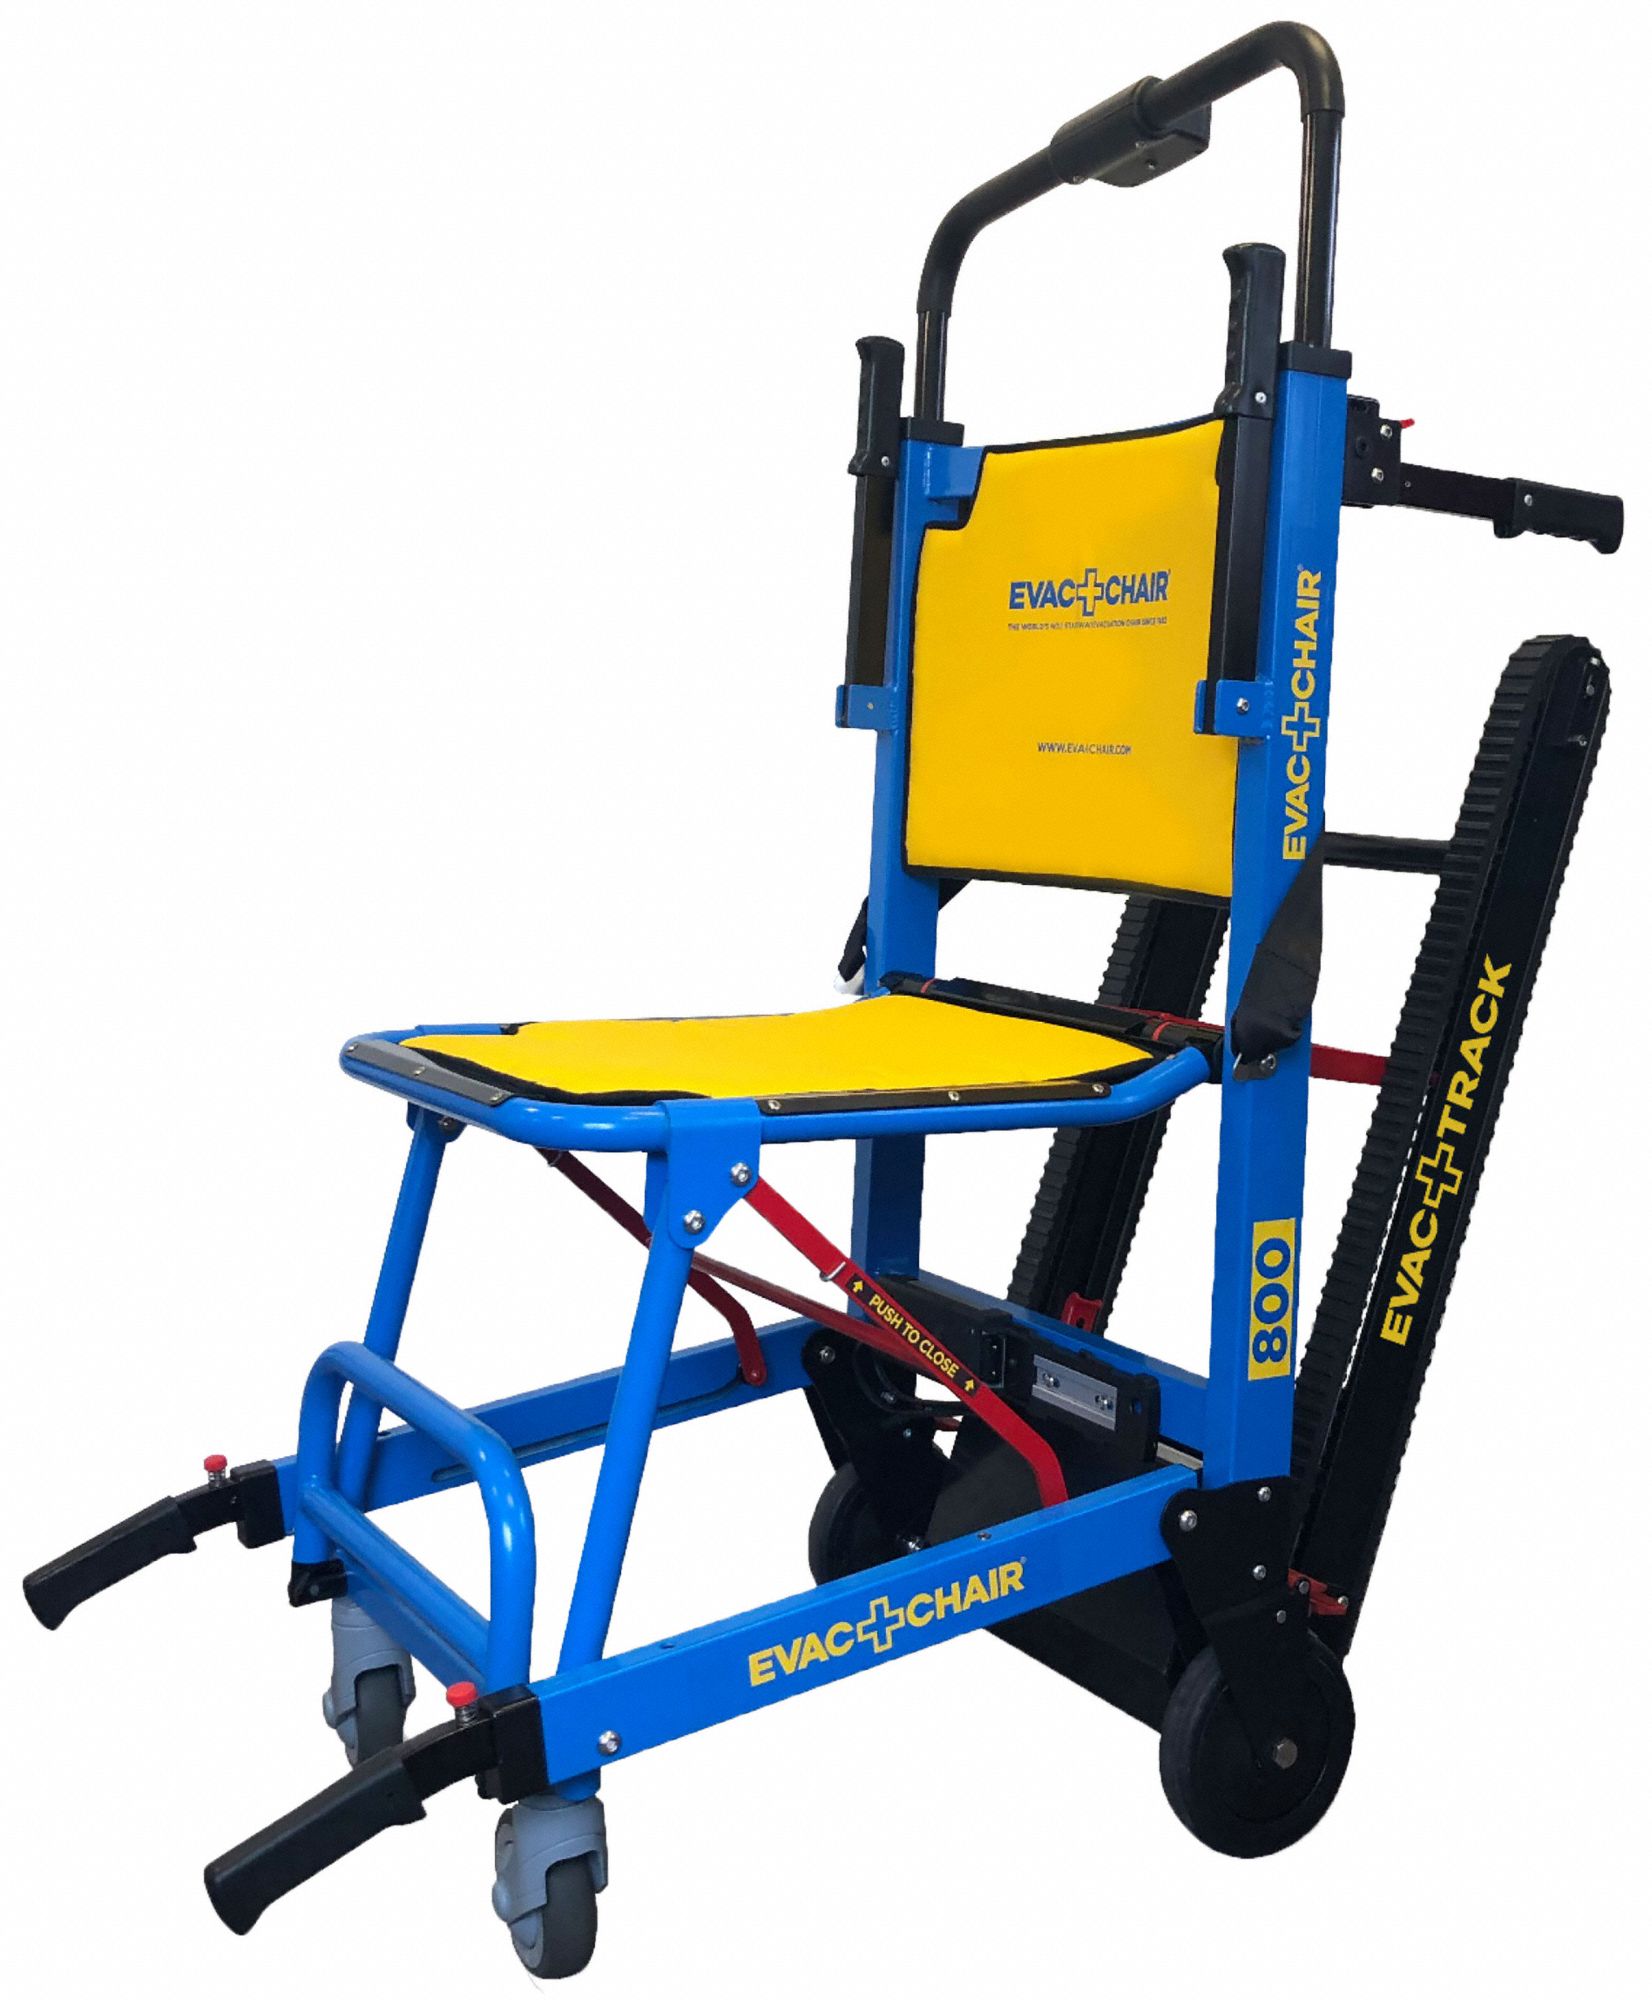 Aluminum Powered Stair Chair with 350 lb Weight Capacity, Blue, Yellow